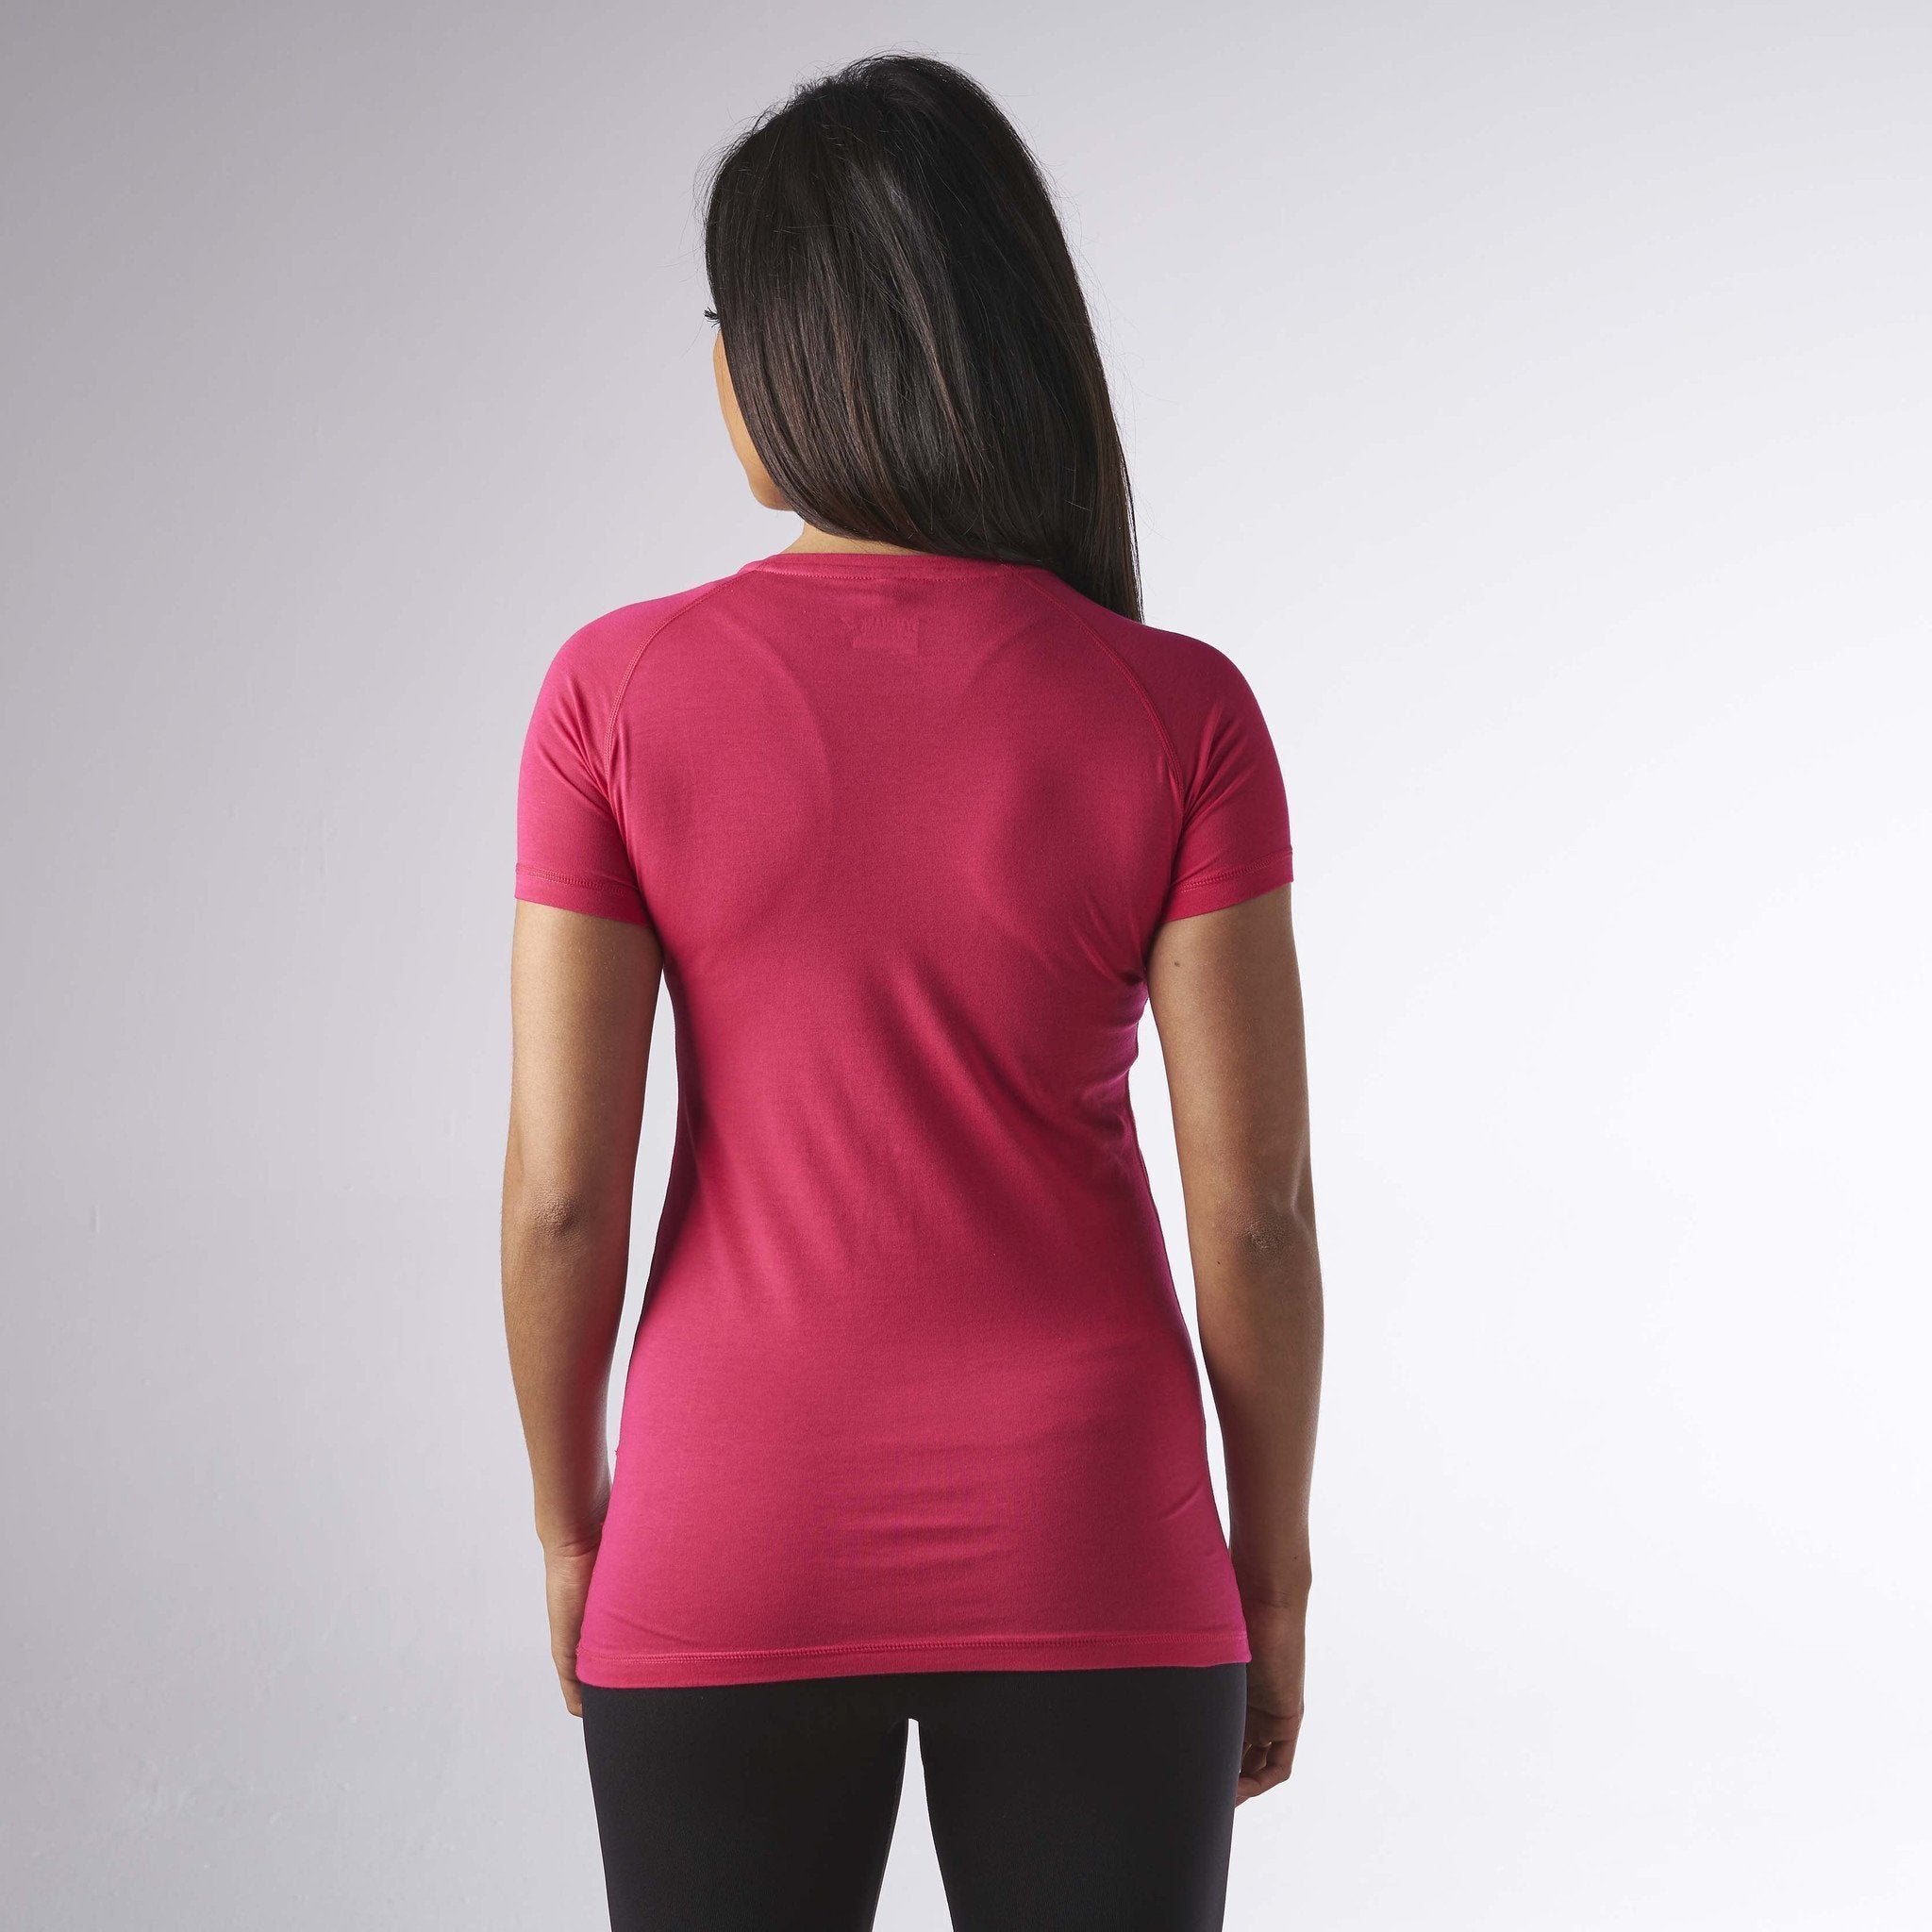 Verve T-Shirt in Cranberry - view 4